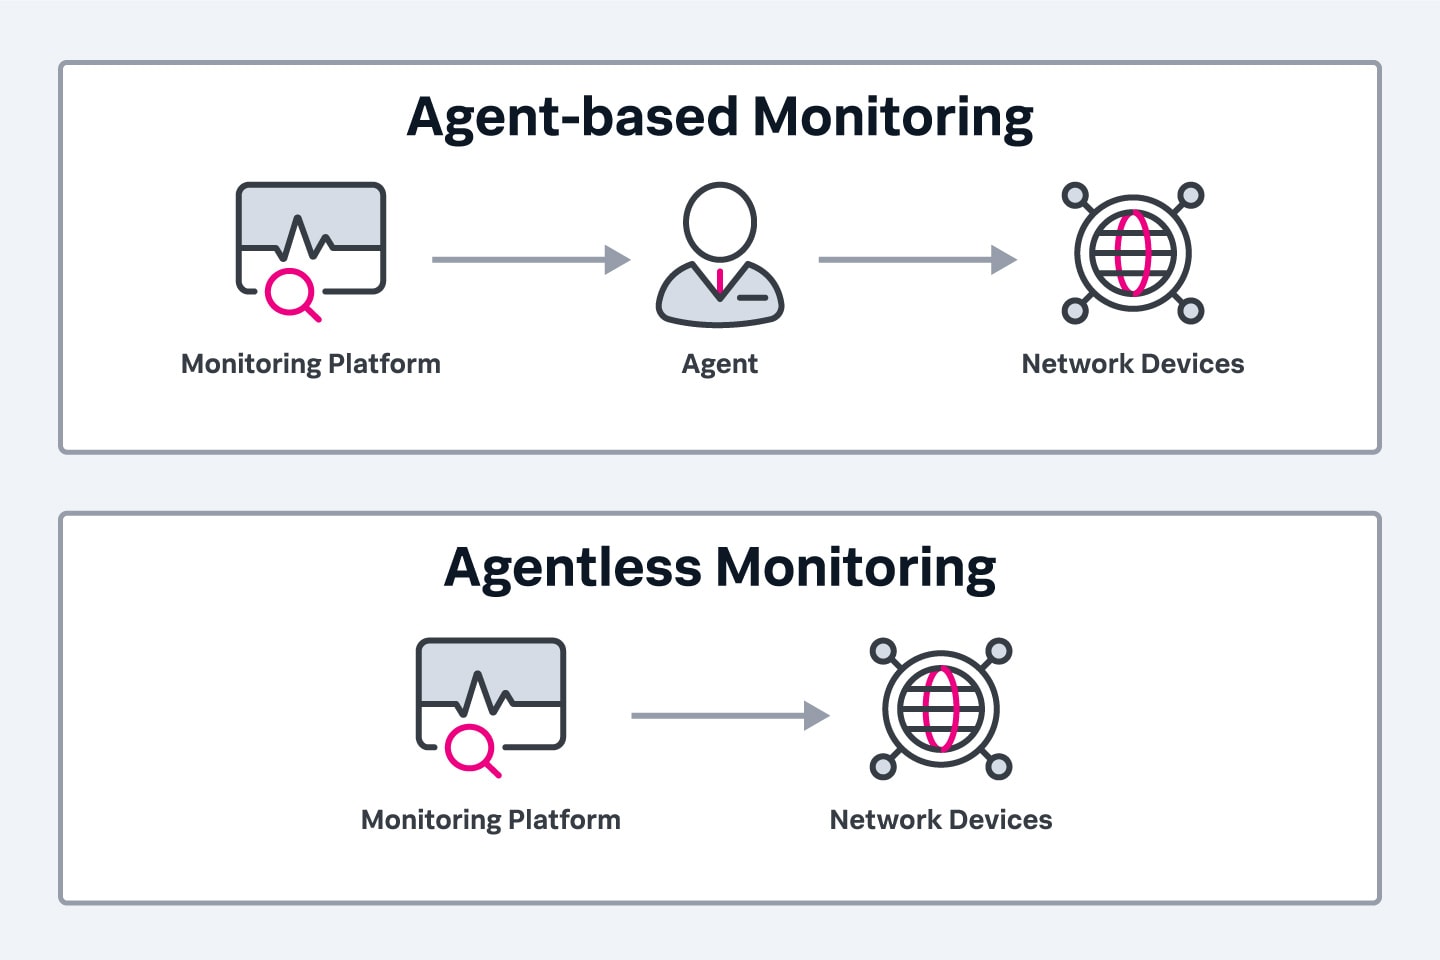 Agent-based monitoring is well suited for devices that periodically disconnect from the corporate network and agentless monitoring is ideal for devices with resource constraints.